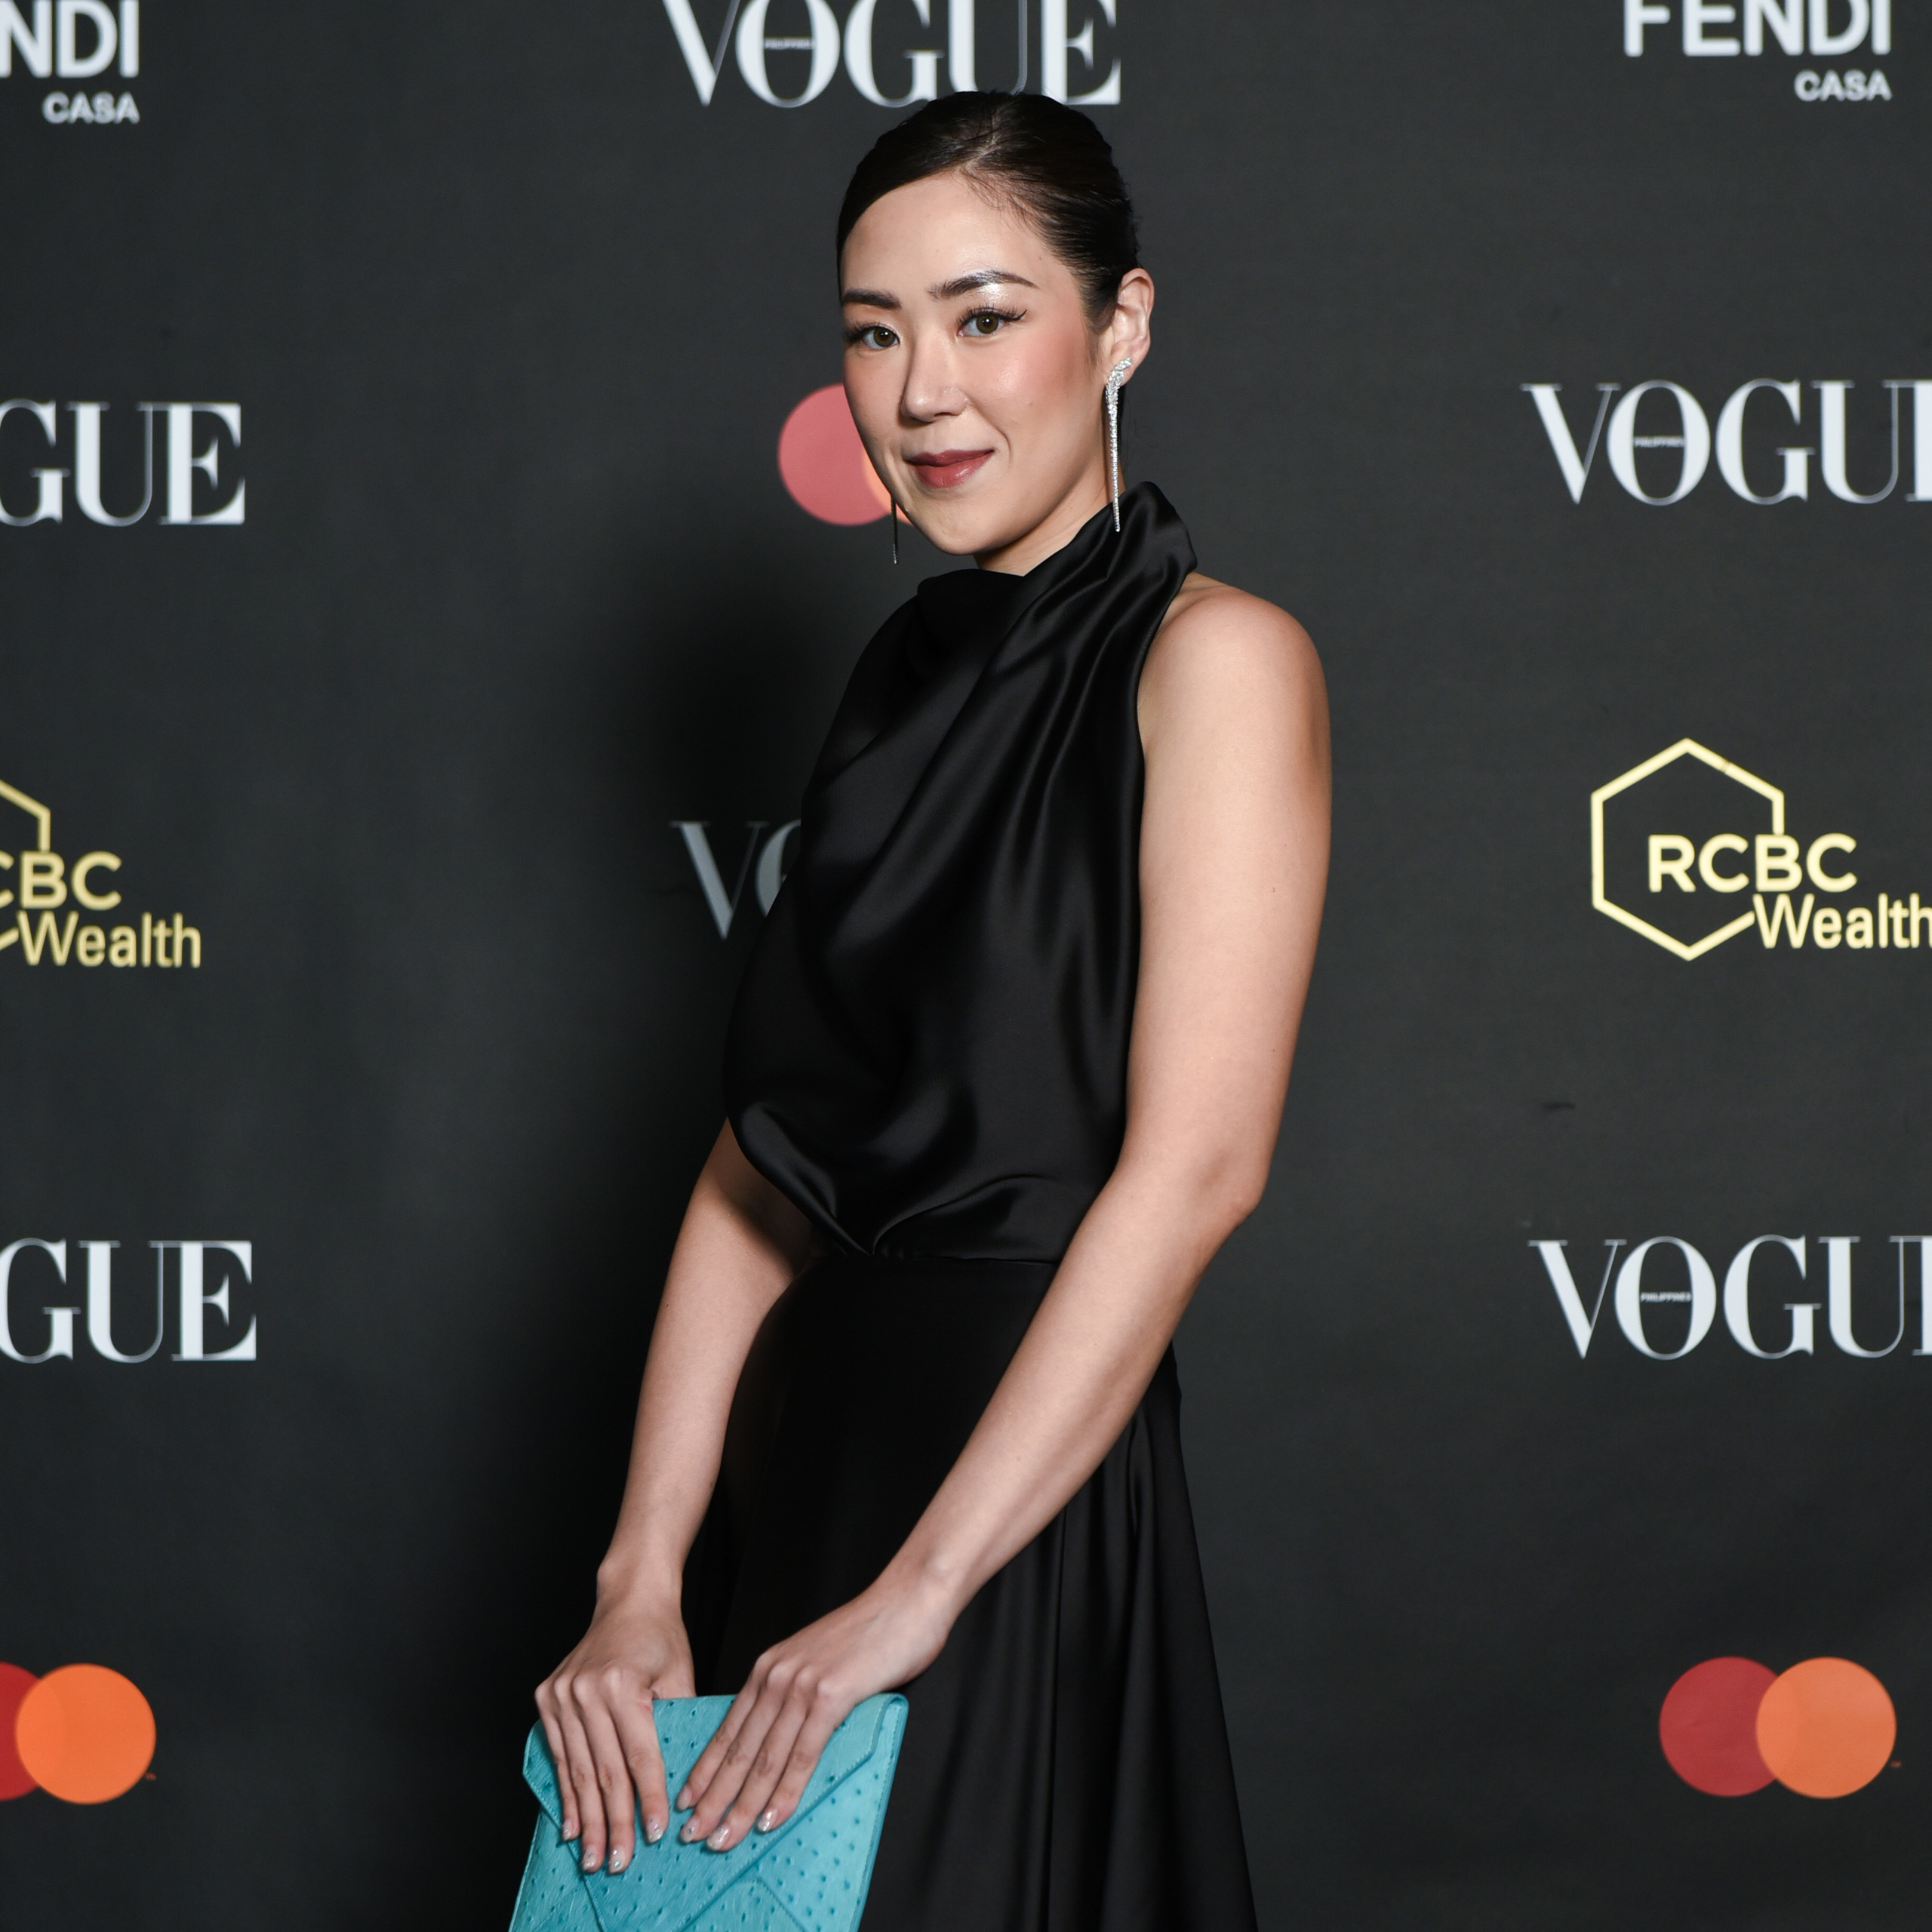 Here’s What These Designers Wore at the Vogue Philippines Gala